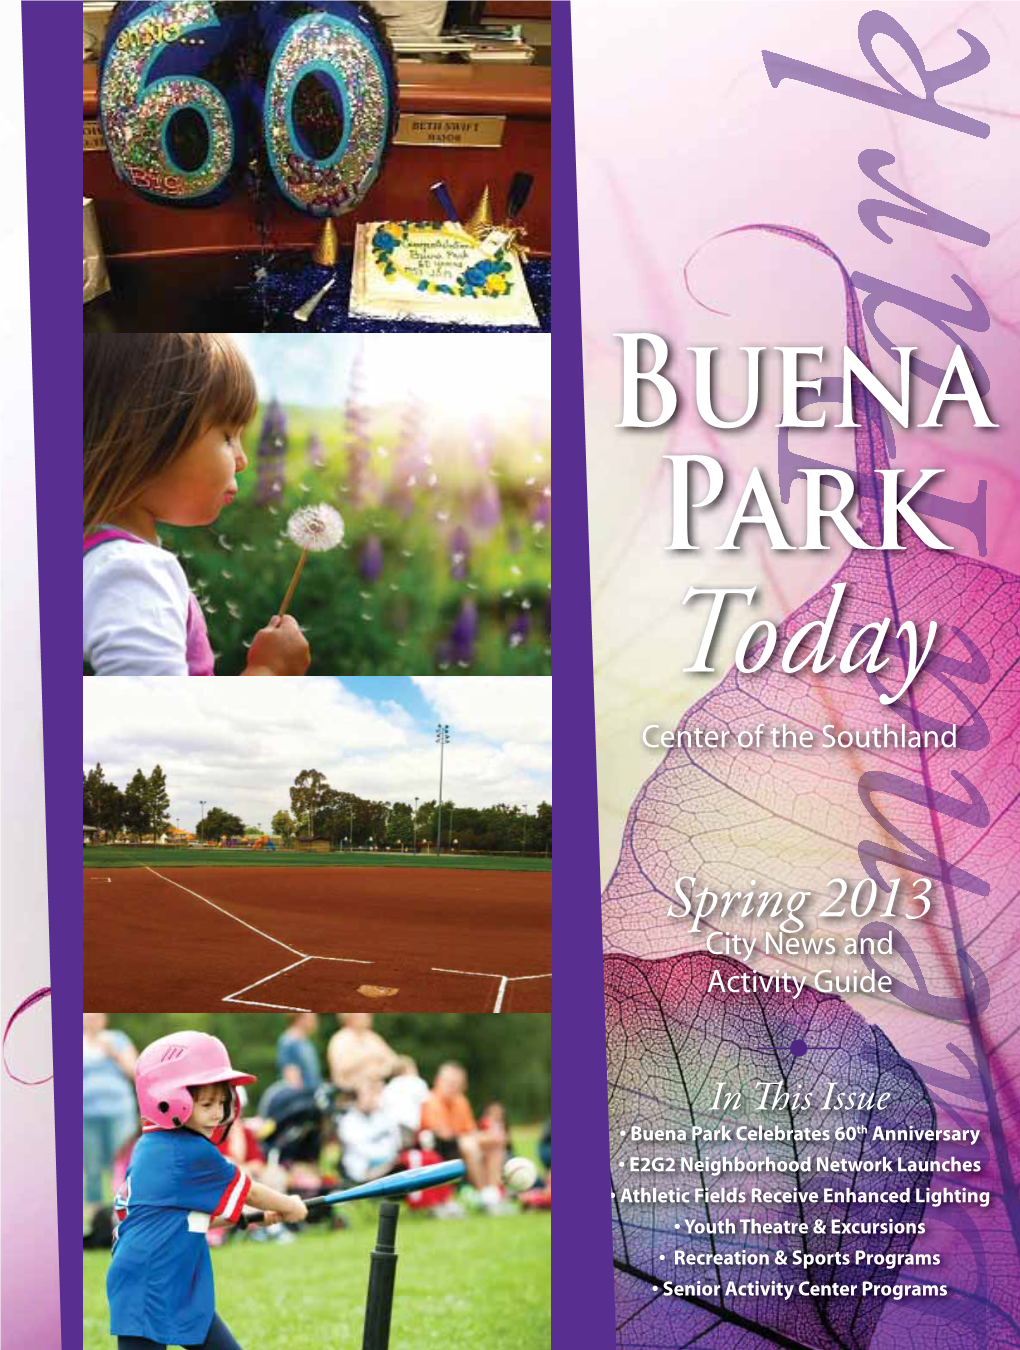 Spring 2013 City News and Activity Guide